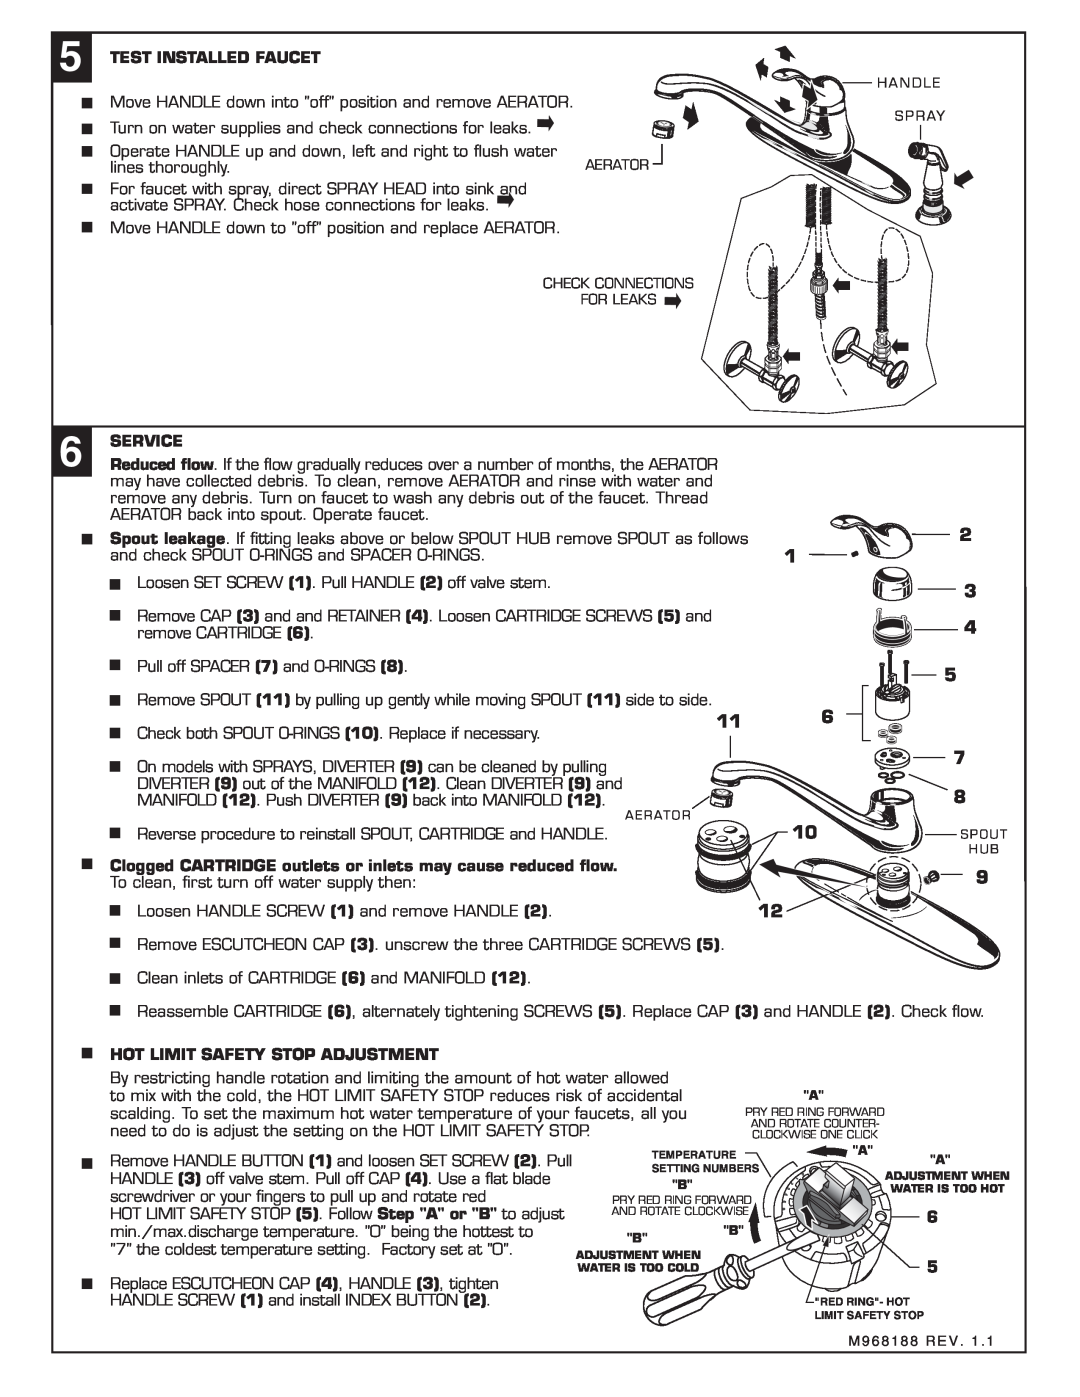 American Standard 3821.6XX installation instructions Test Installed Faucet, Service, Hot Limit Safety Stop Adjustment 